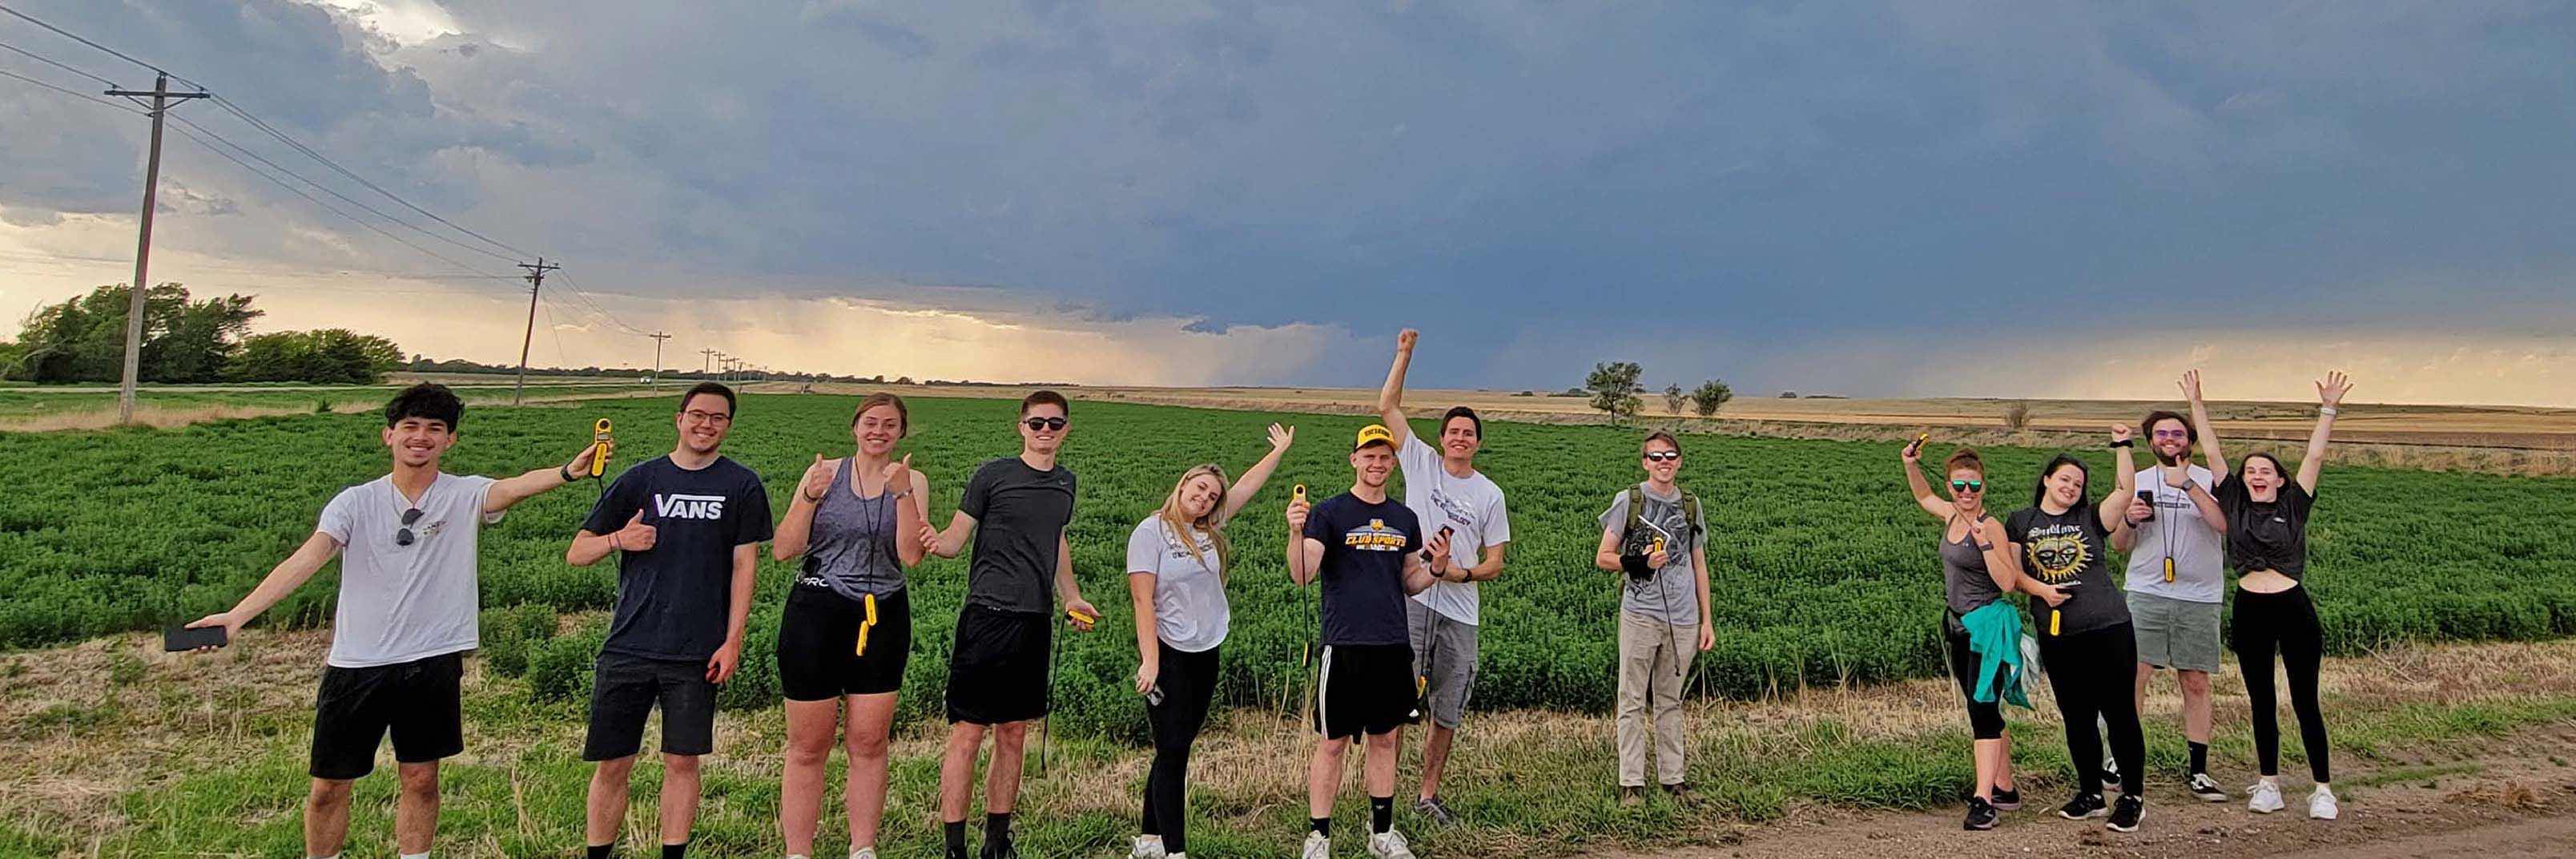 Thunderstorm with Students and Instructors